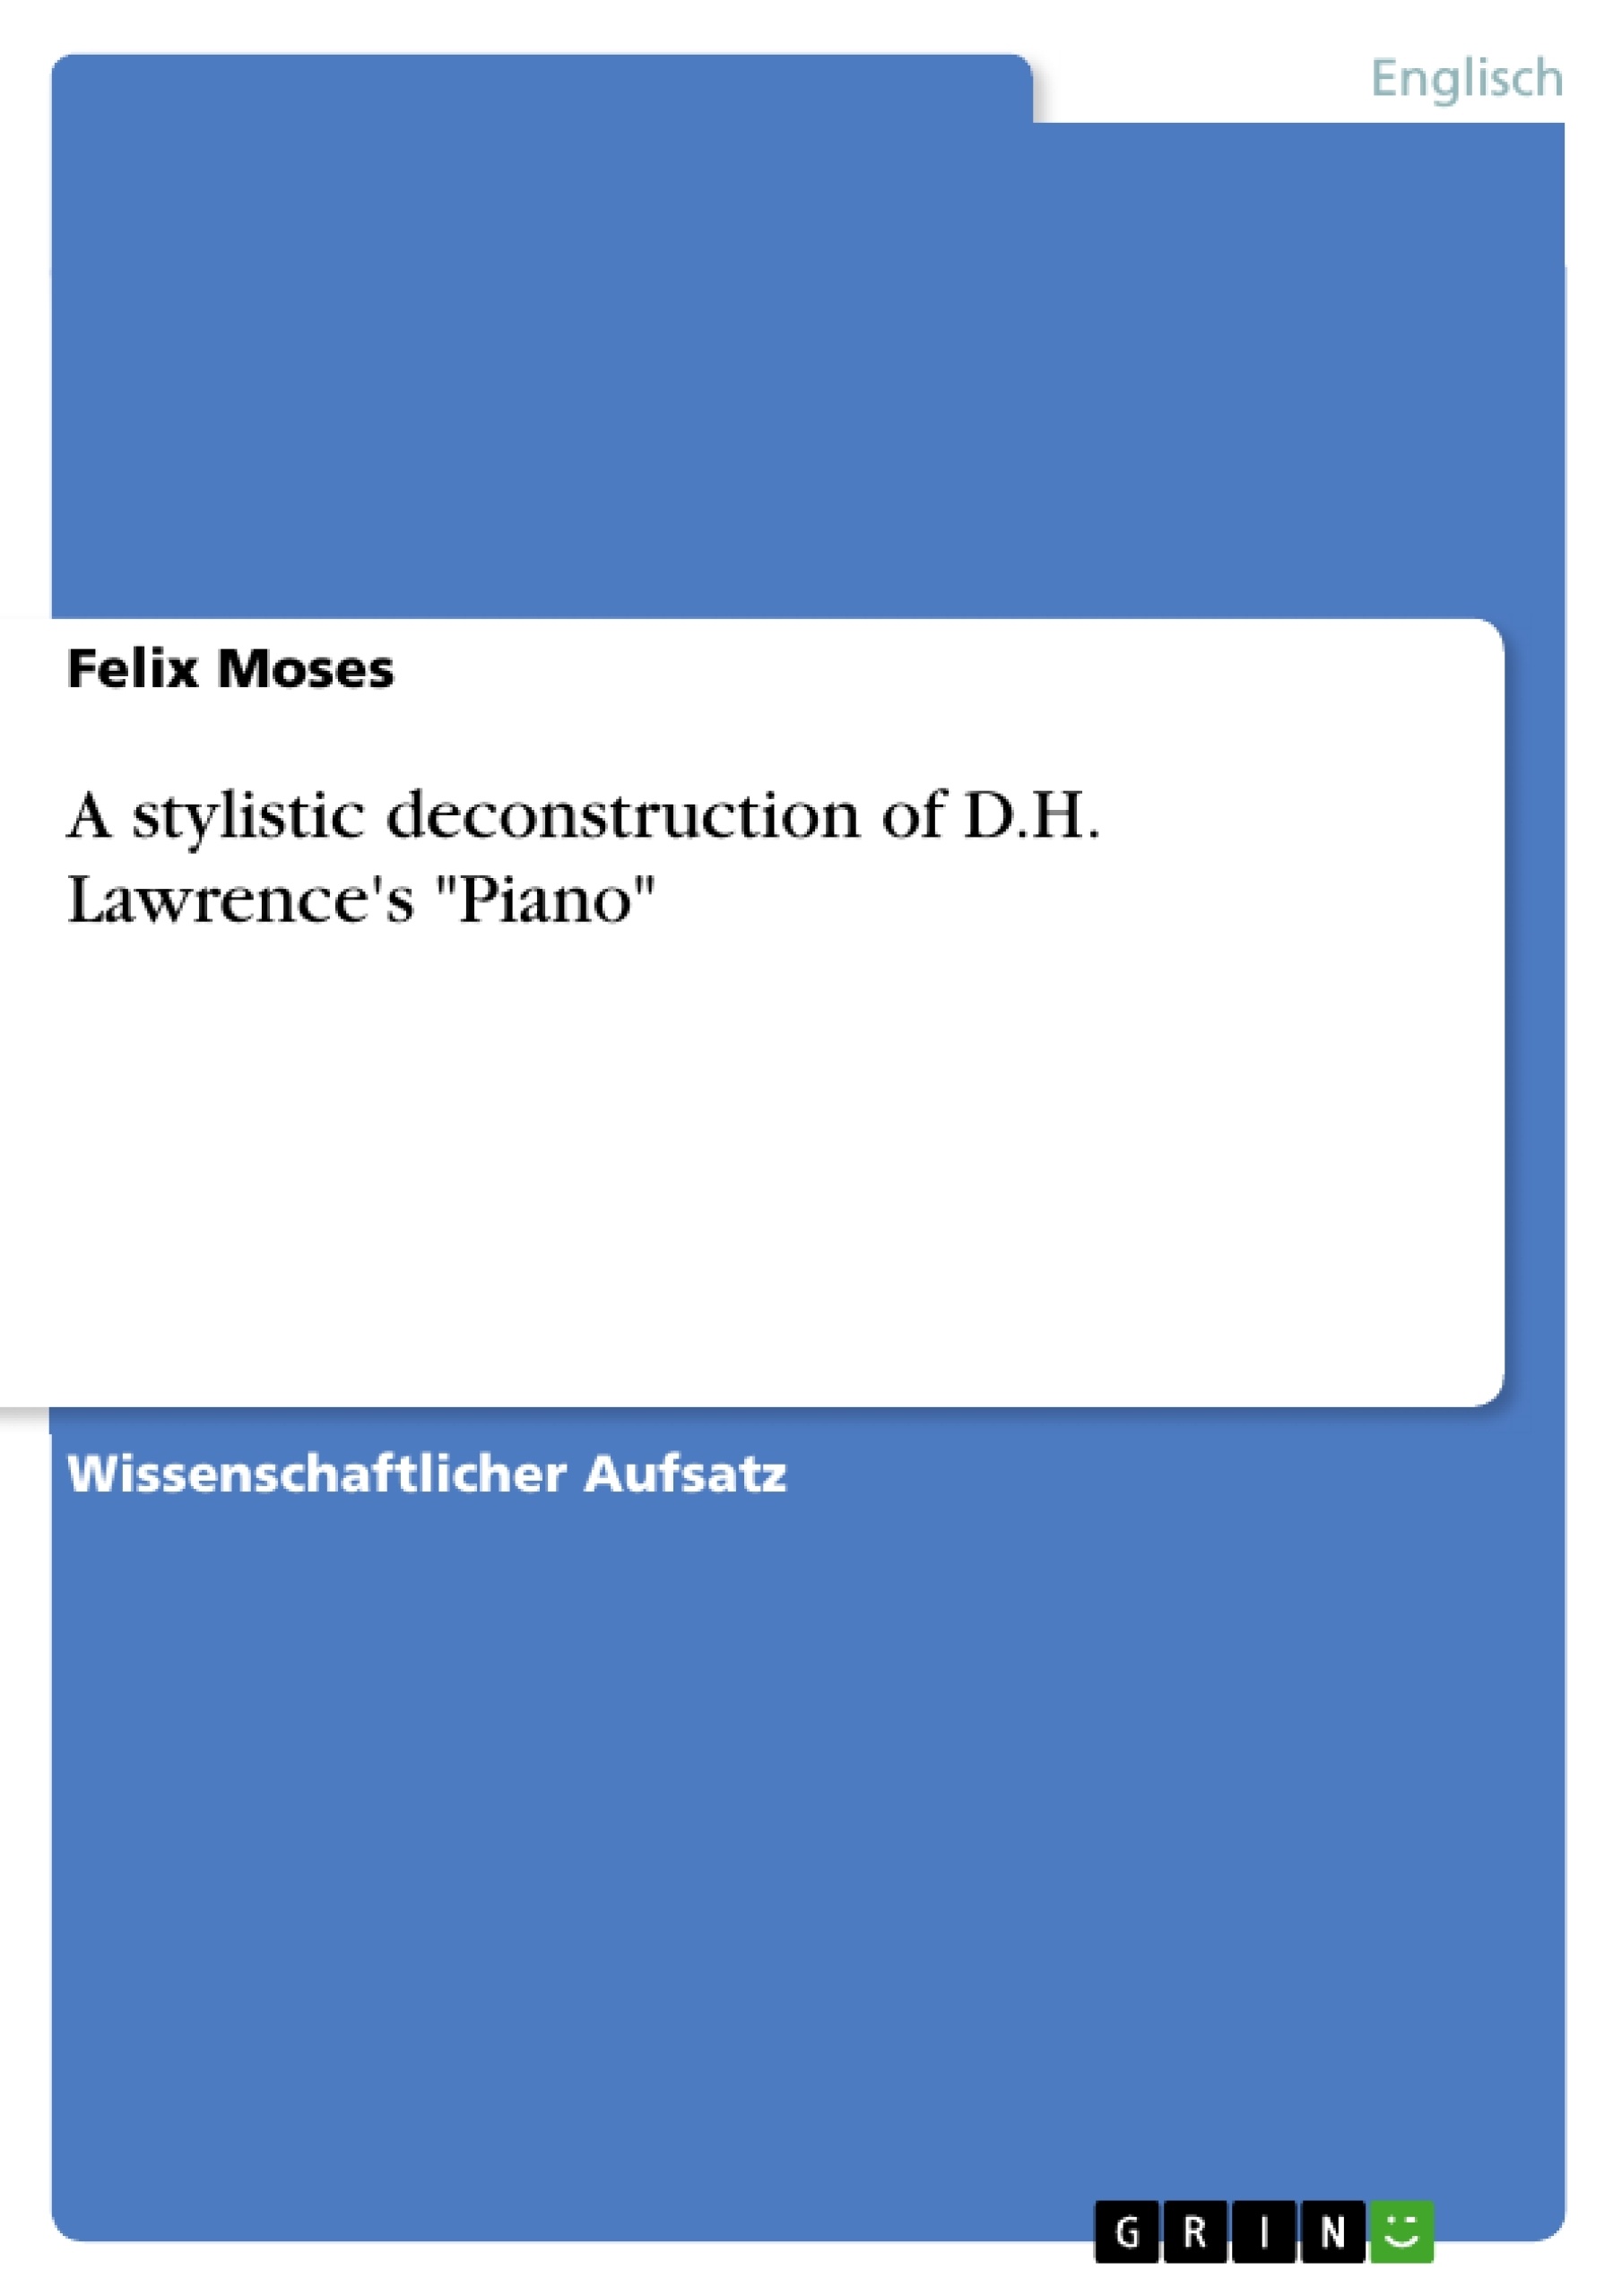 Titre: A stylistic deconstruction of D.H. Lawrence's "Piano"